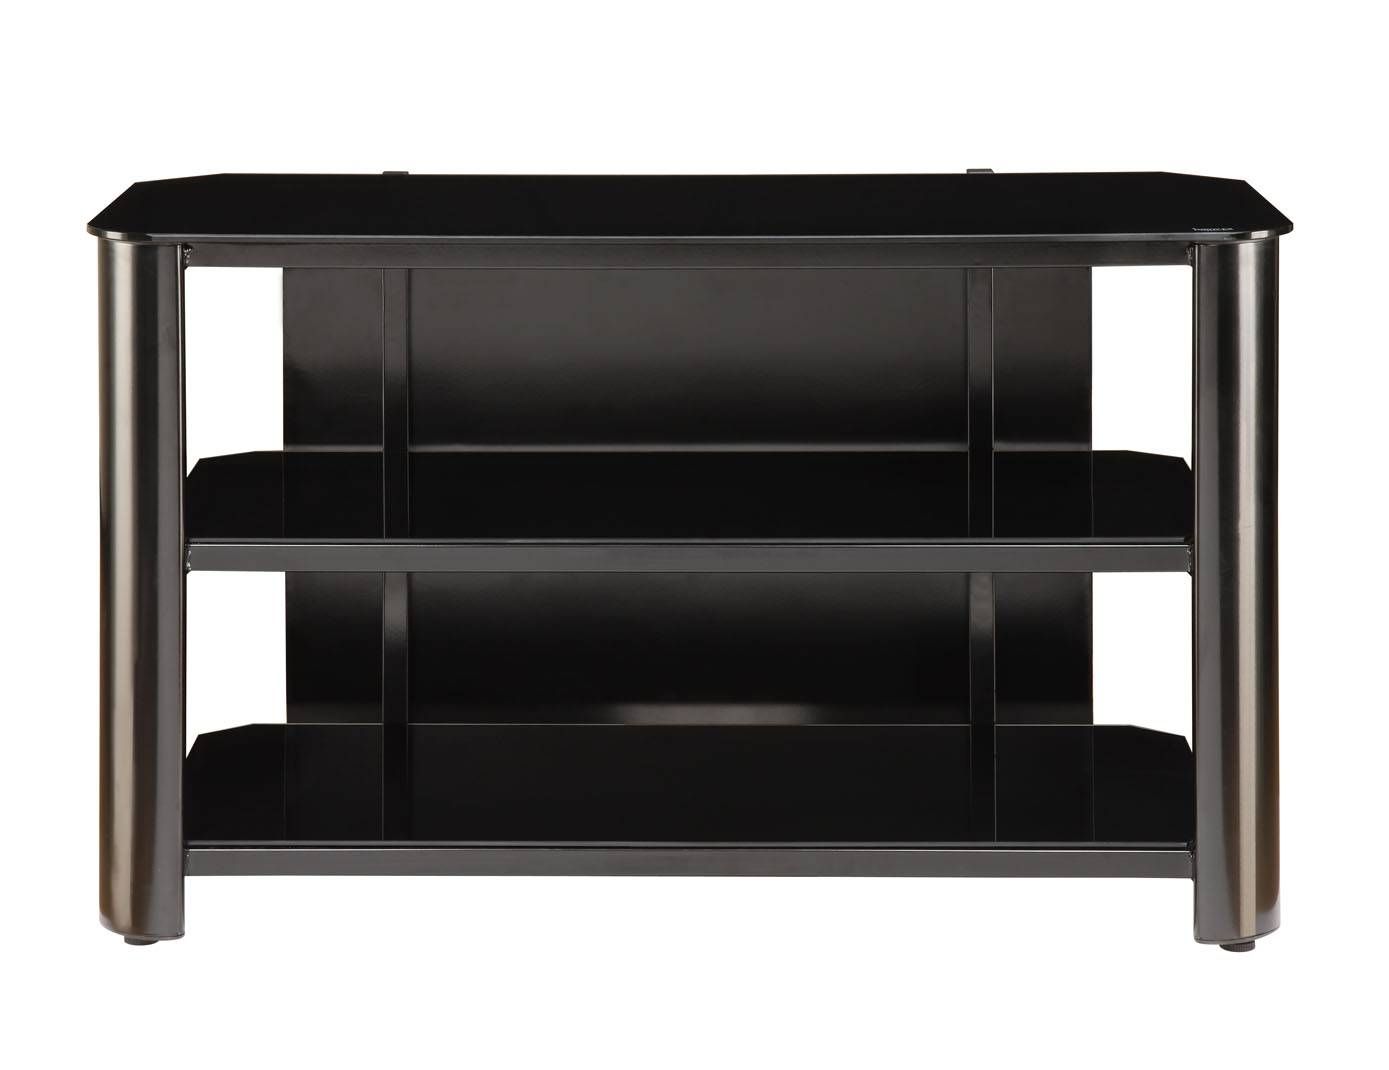 Innovex Black Glass Tv Stand Tpt42g29 Regarding Black Glass Tv Stands (View 2 of 15)